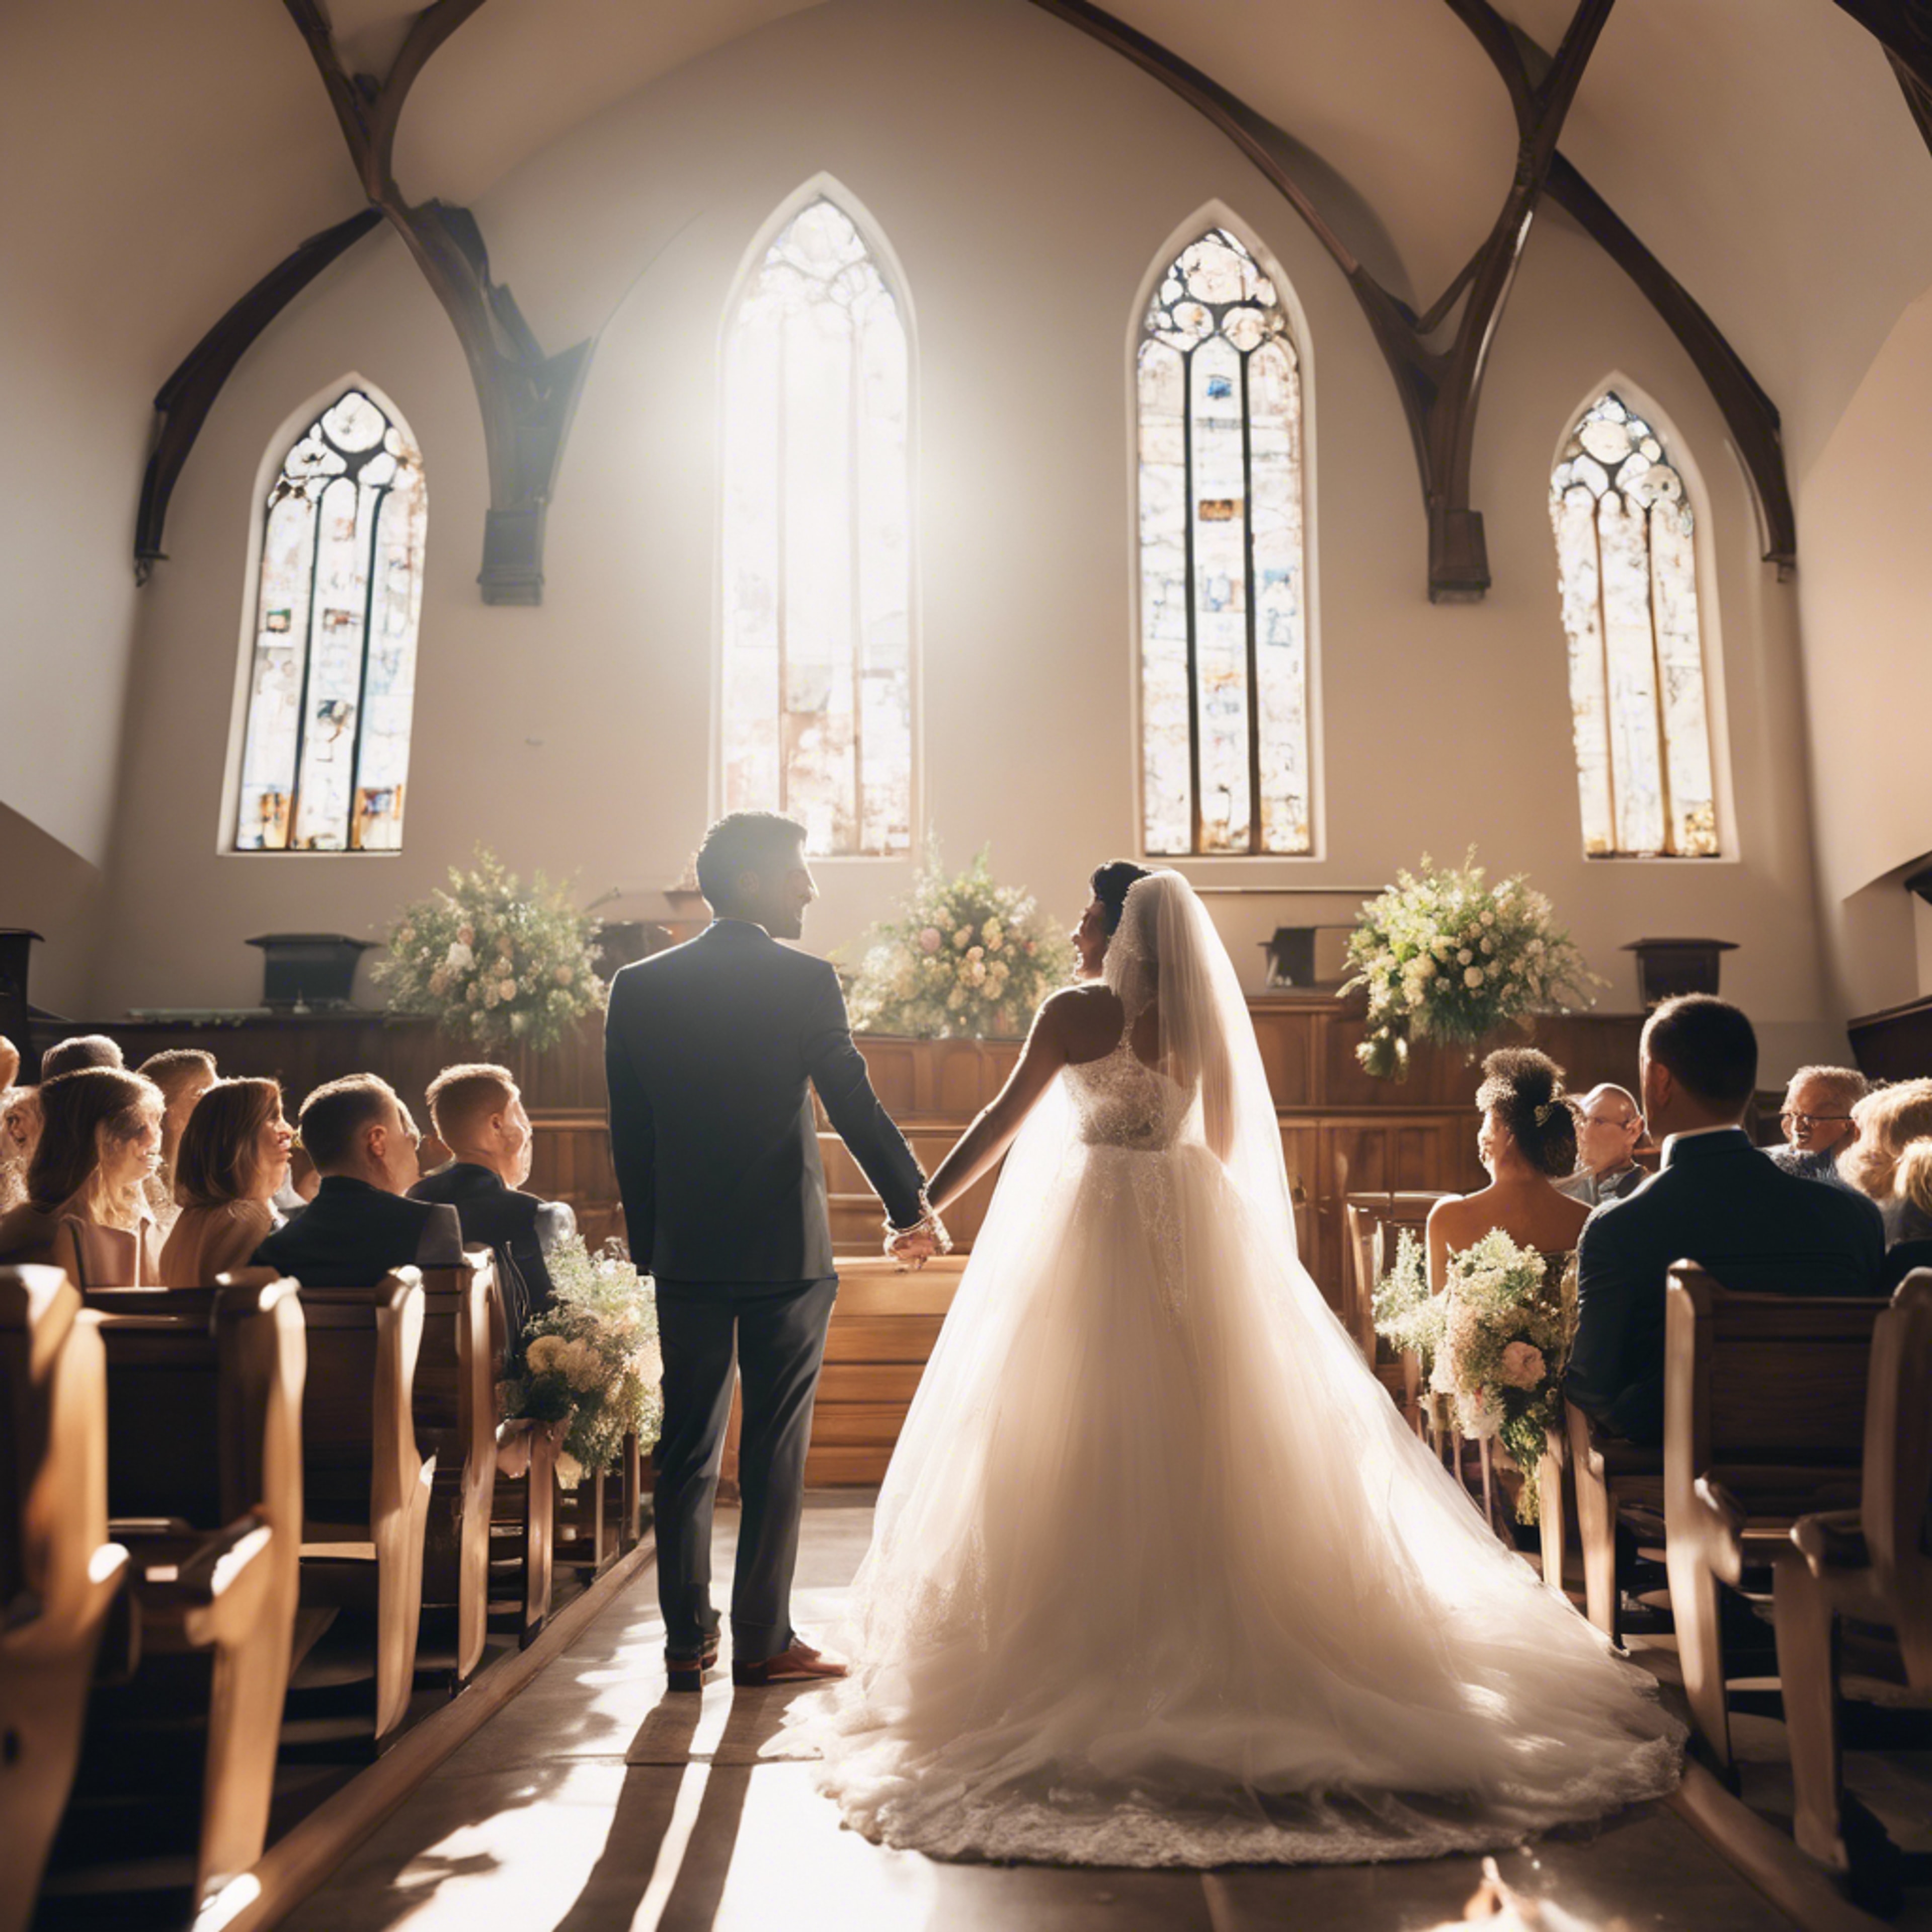 A happy couple getting married in a sunlit church, filled with joy and love. Tapet[c91a19bd1c8e4c9b9bbb]